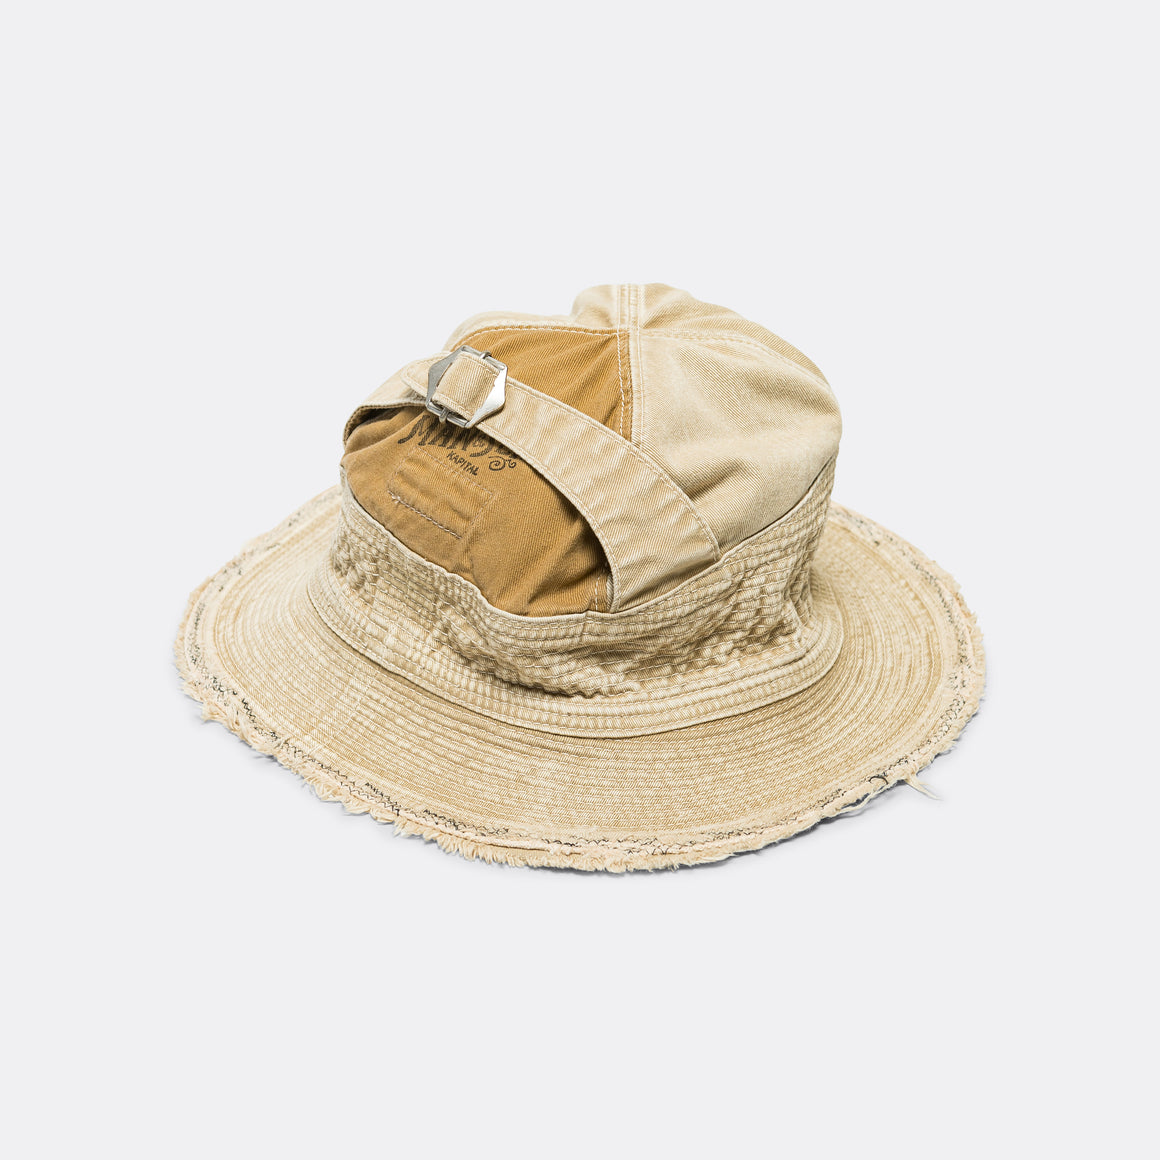 Kapital - 11.5oz THE OLD MAN AND THE SEA Hat (SOFT CRASH REMAKE) - Beige - UP THERE